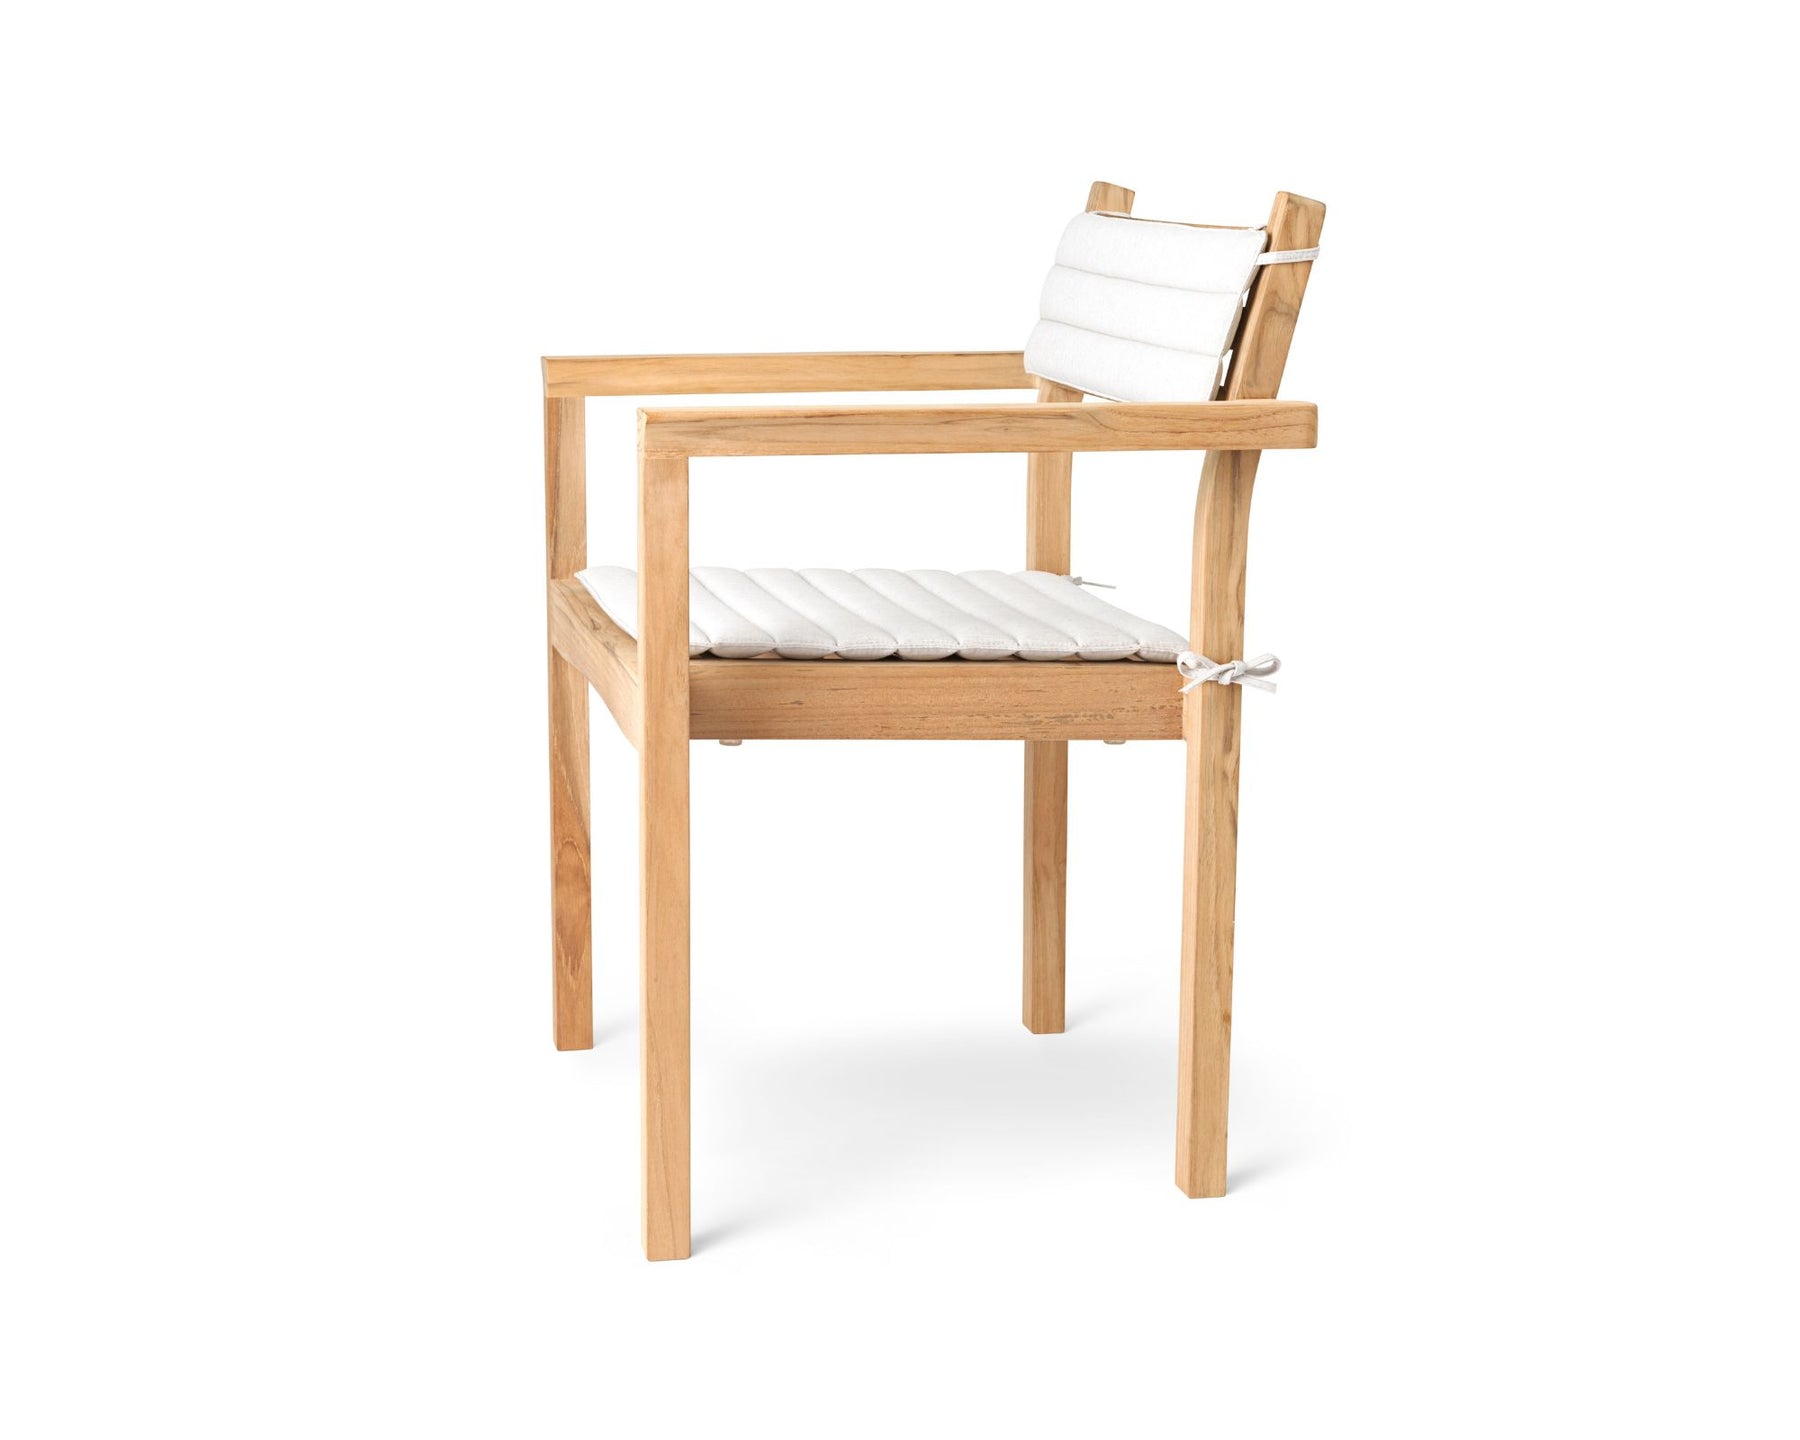 Minimal Outdoor Dining Chair | DSHOP